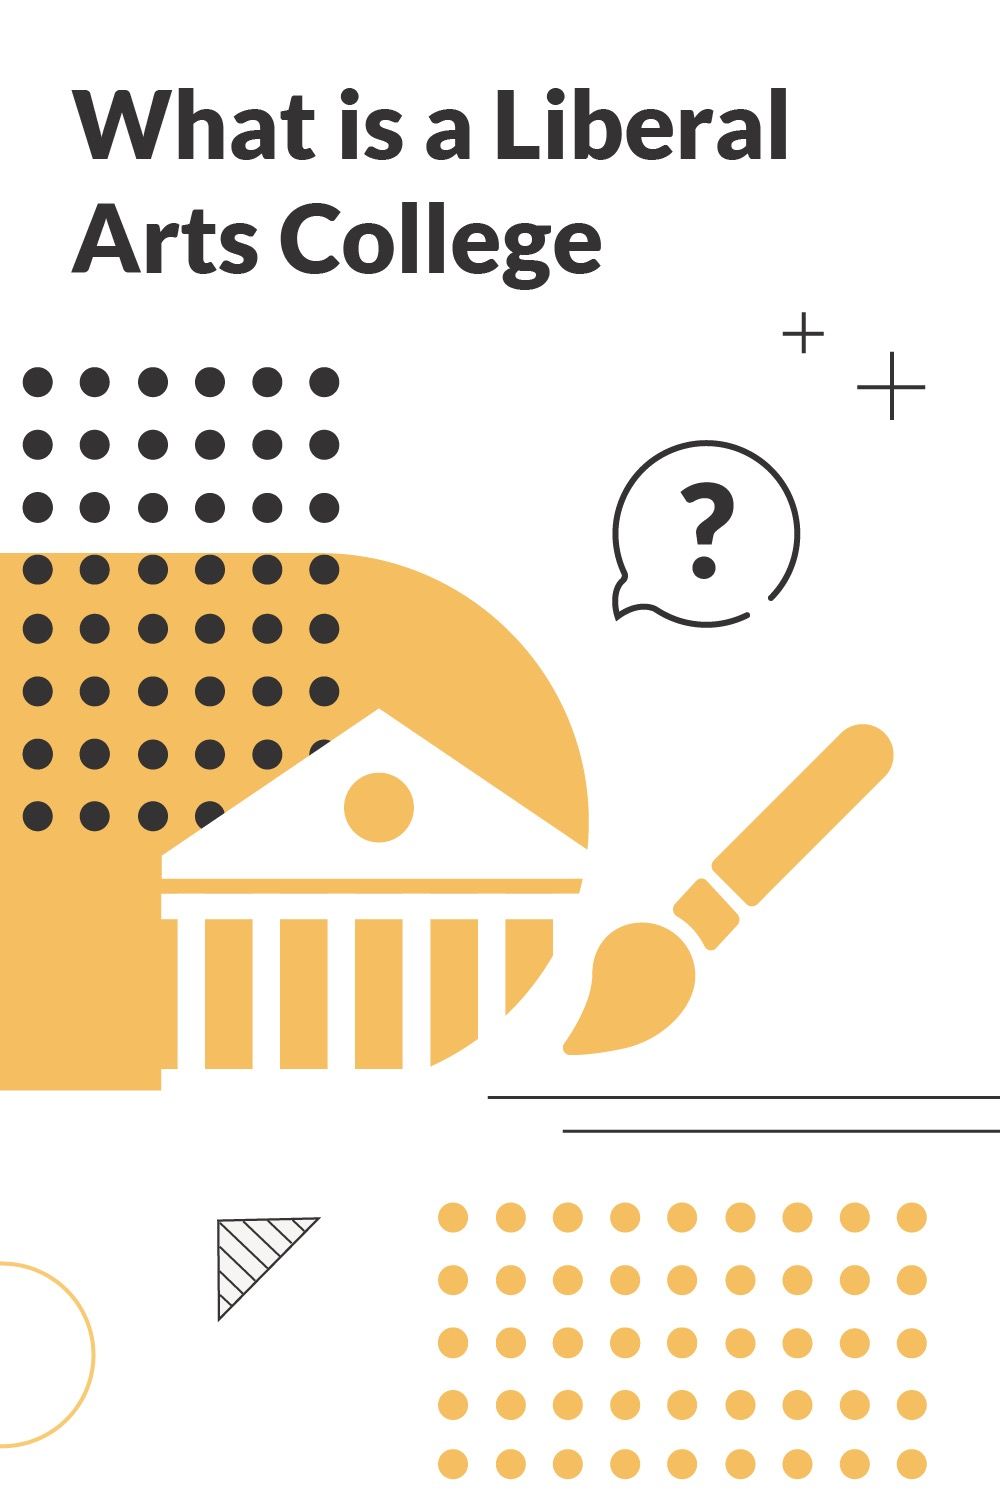 What Is A Liberal Arts College Pinterest Image